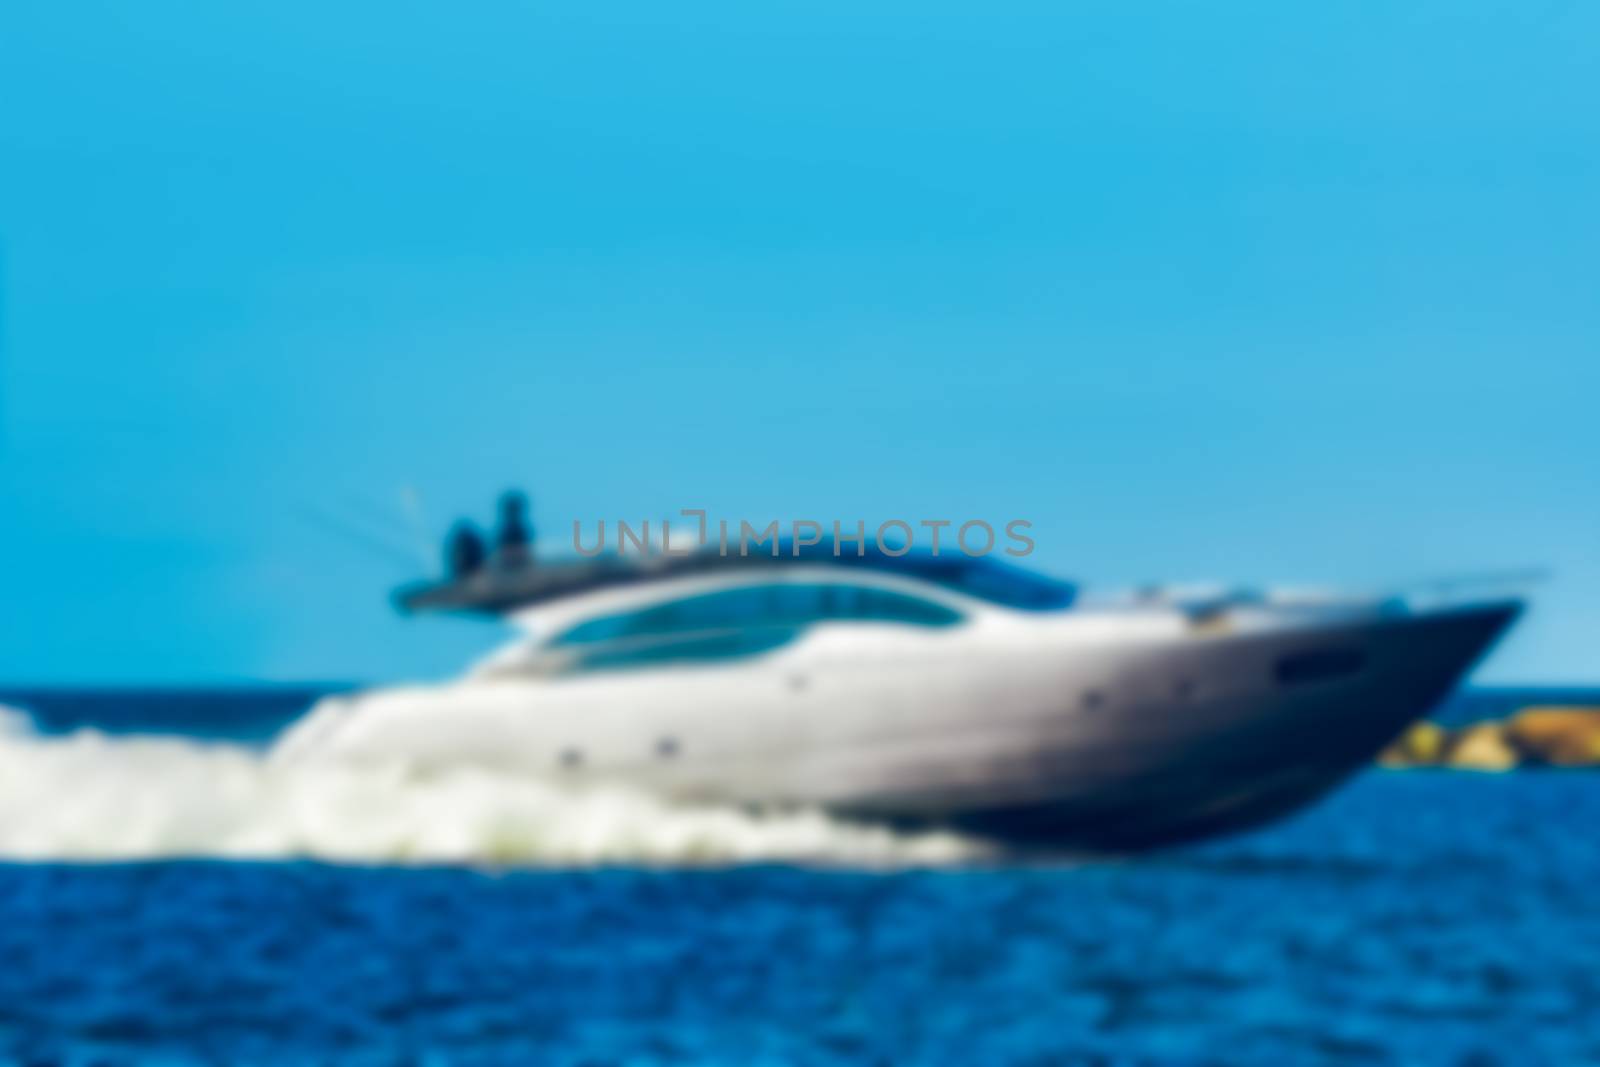 Speed boat - blurred image by sengnsp